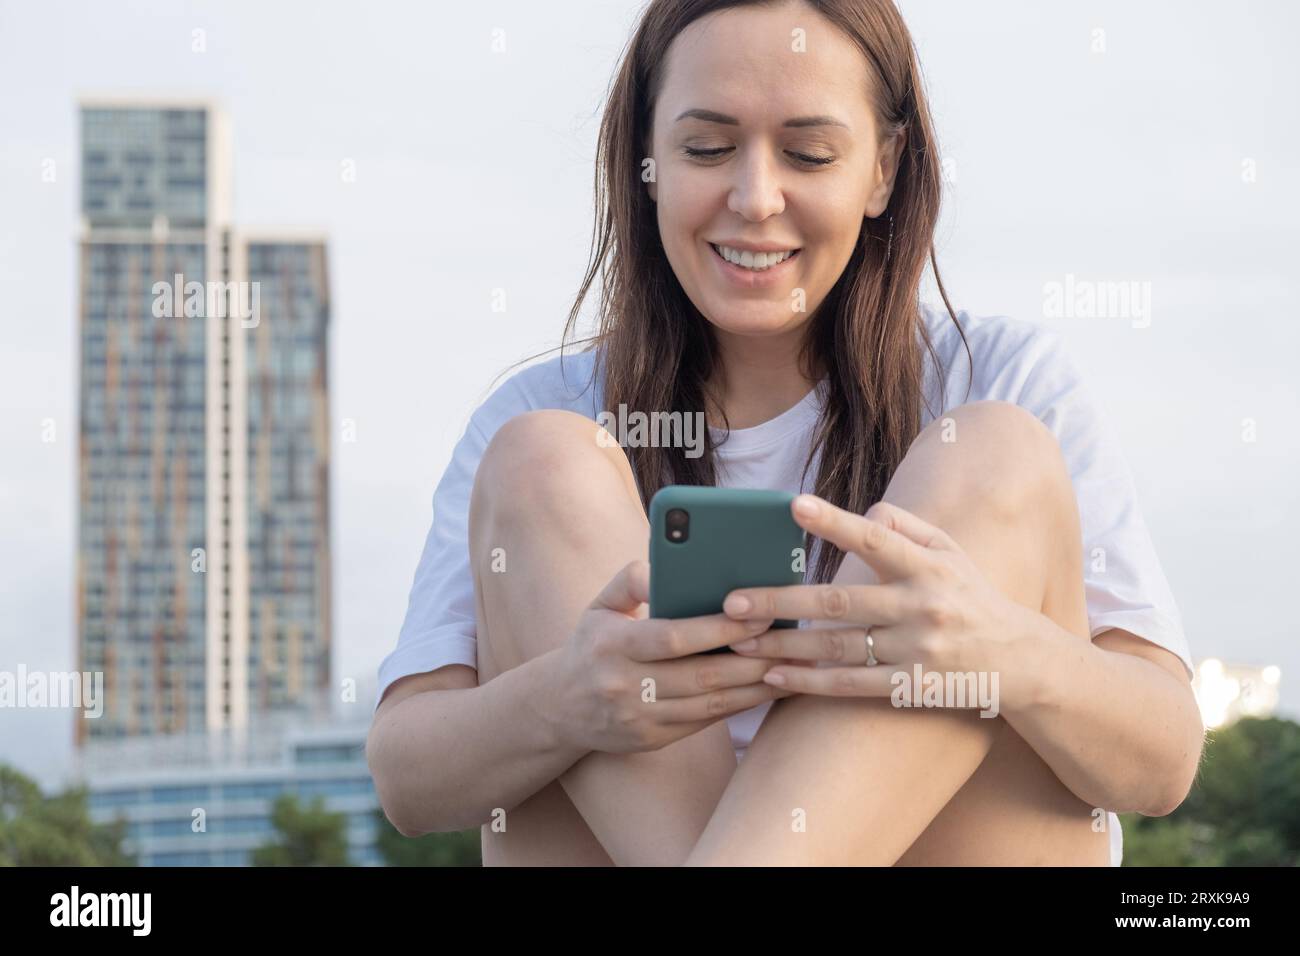 Smiling young Caucasian woman using applications on mobile phone, texting message on smartphone. Happy girl checking mobile apps outdoors using Stock Photo